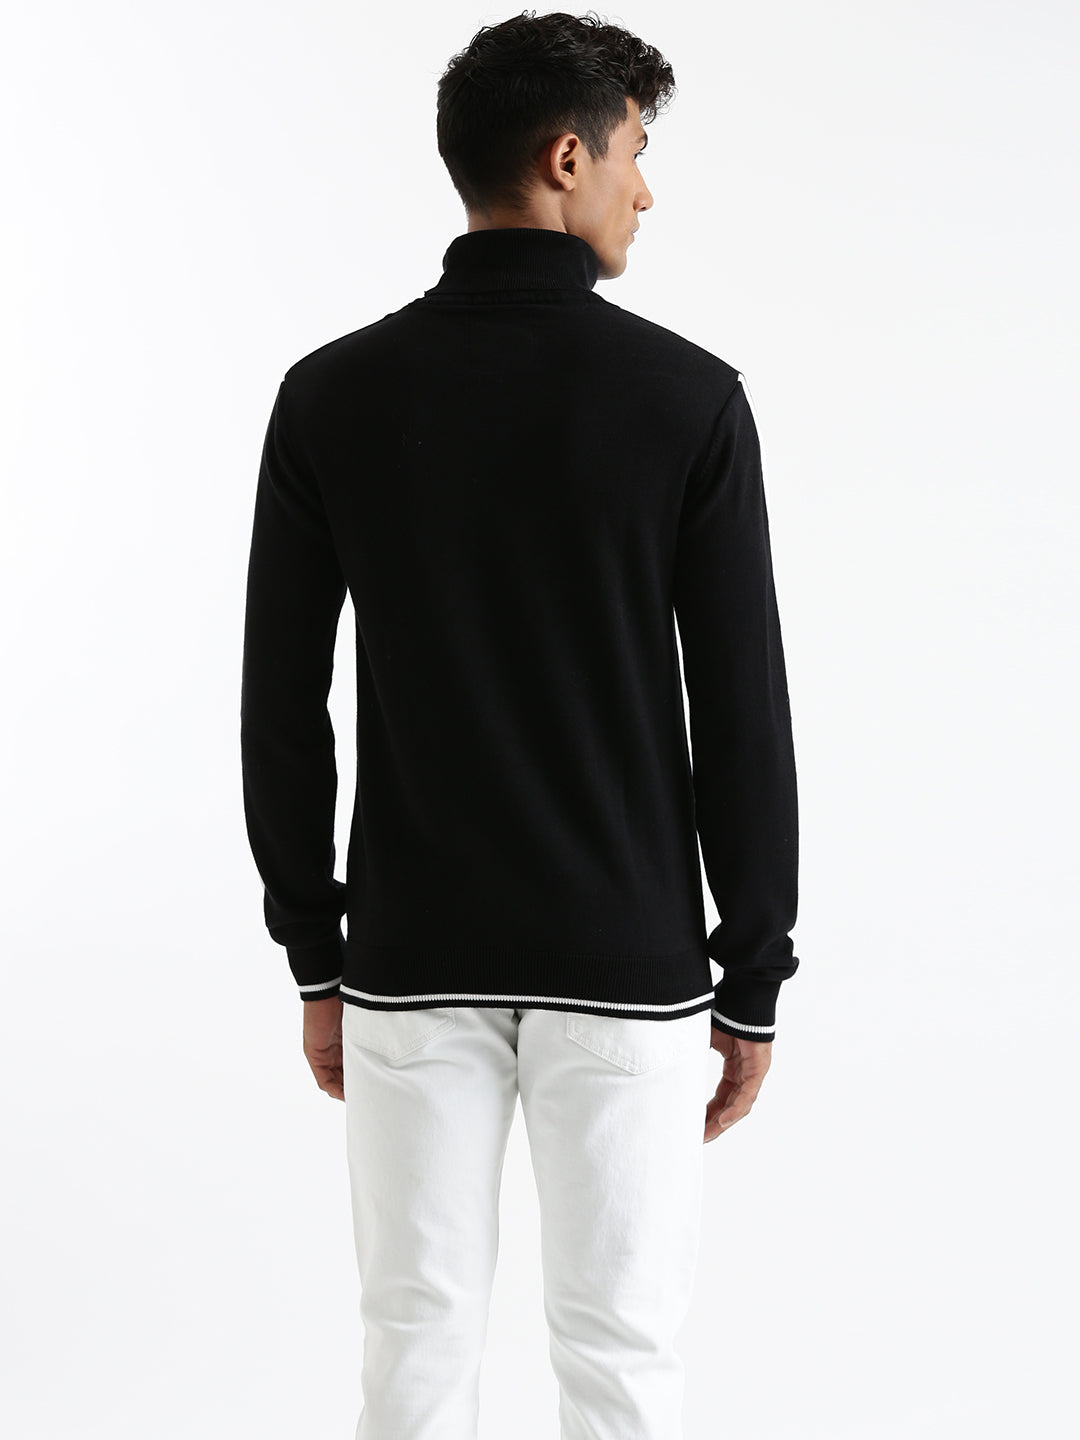 Classic Style Solid Sweater